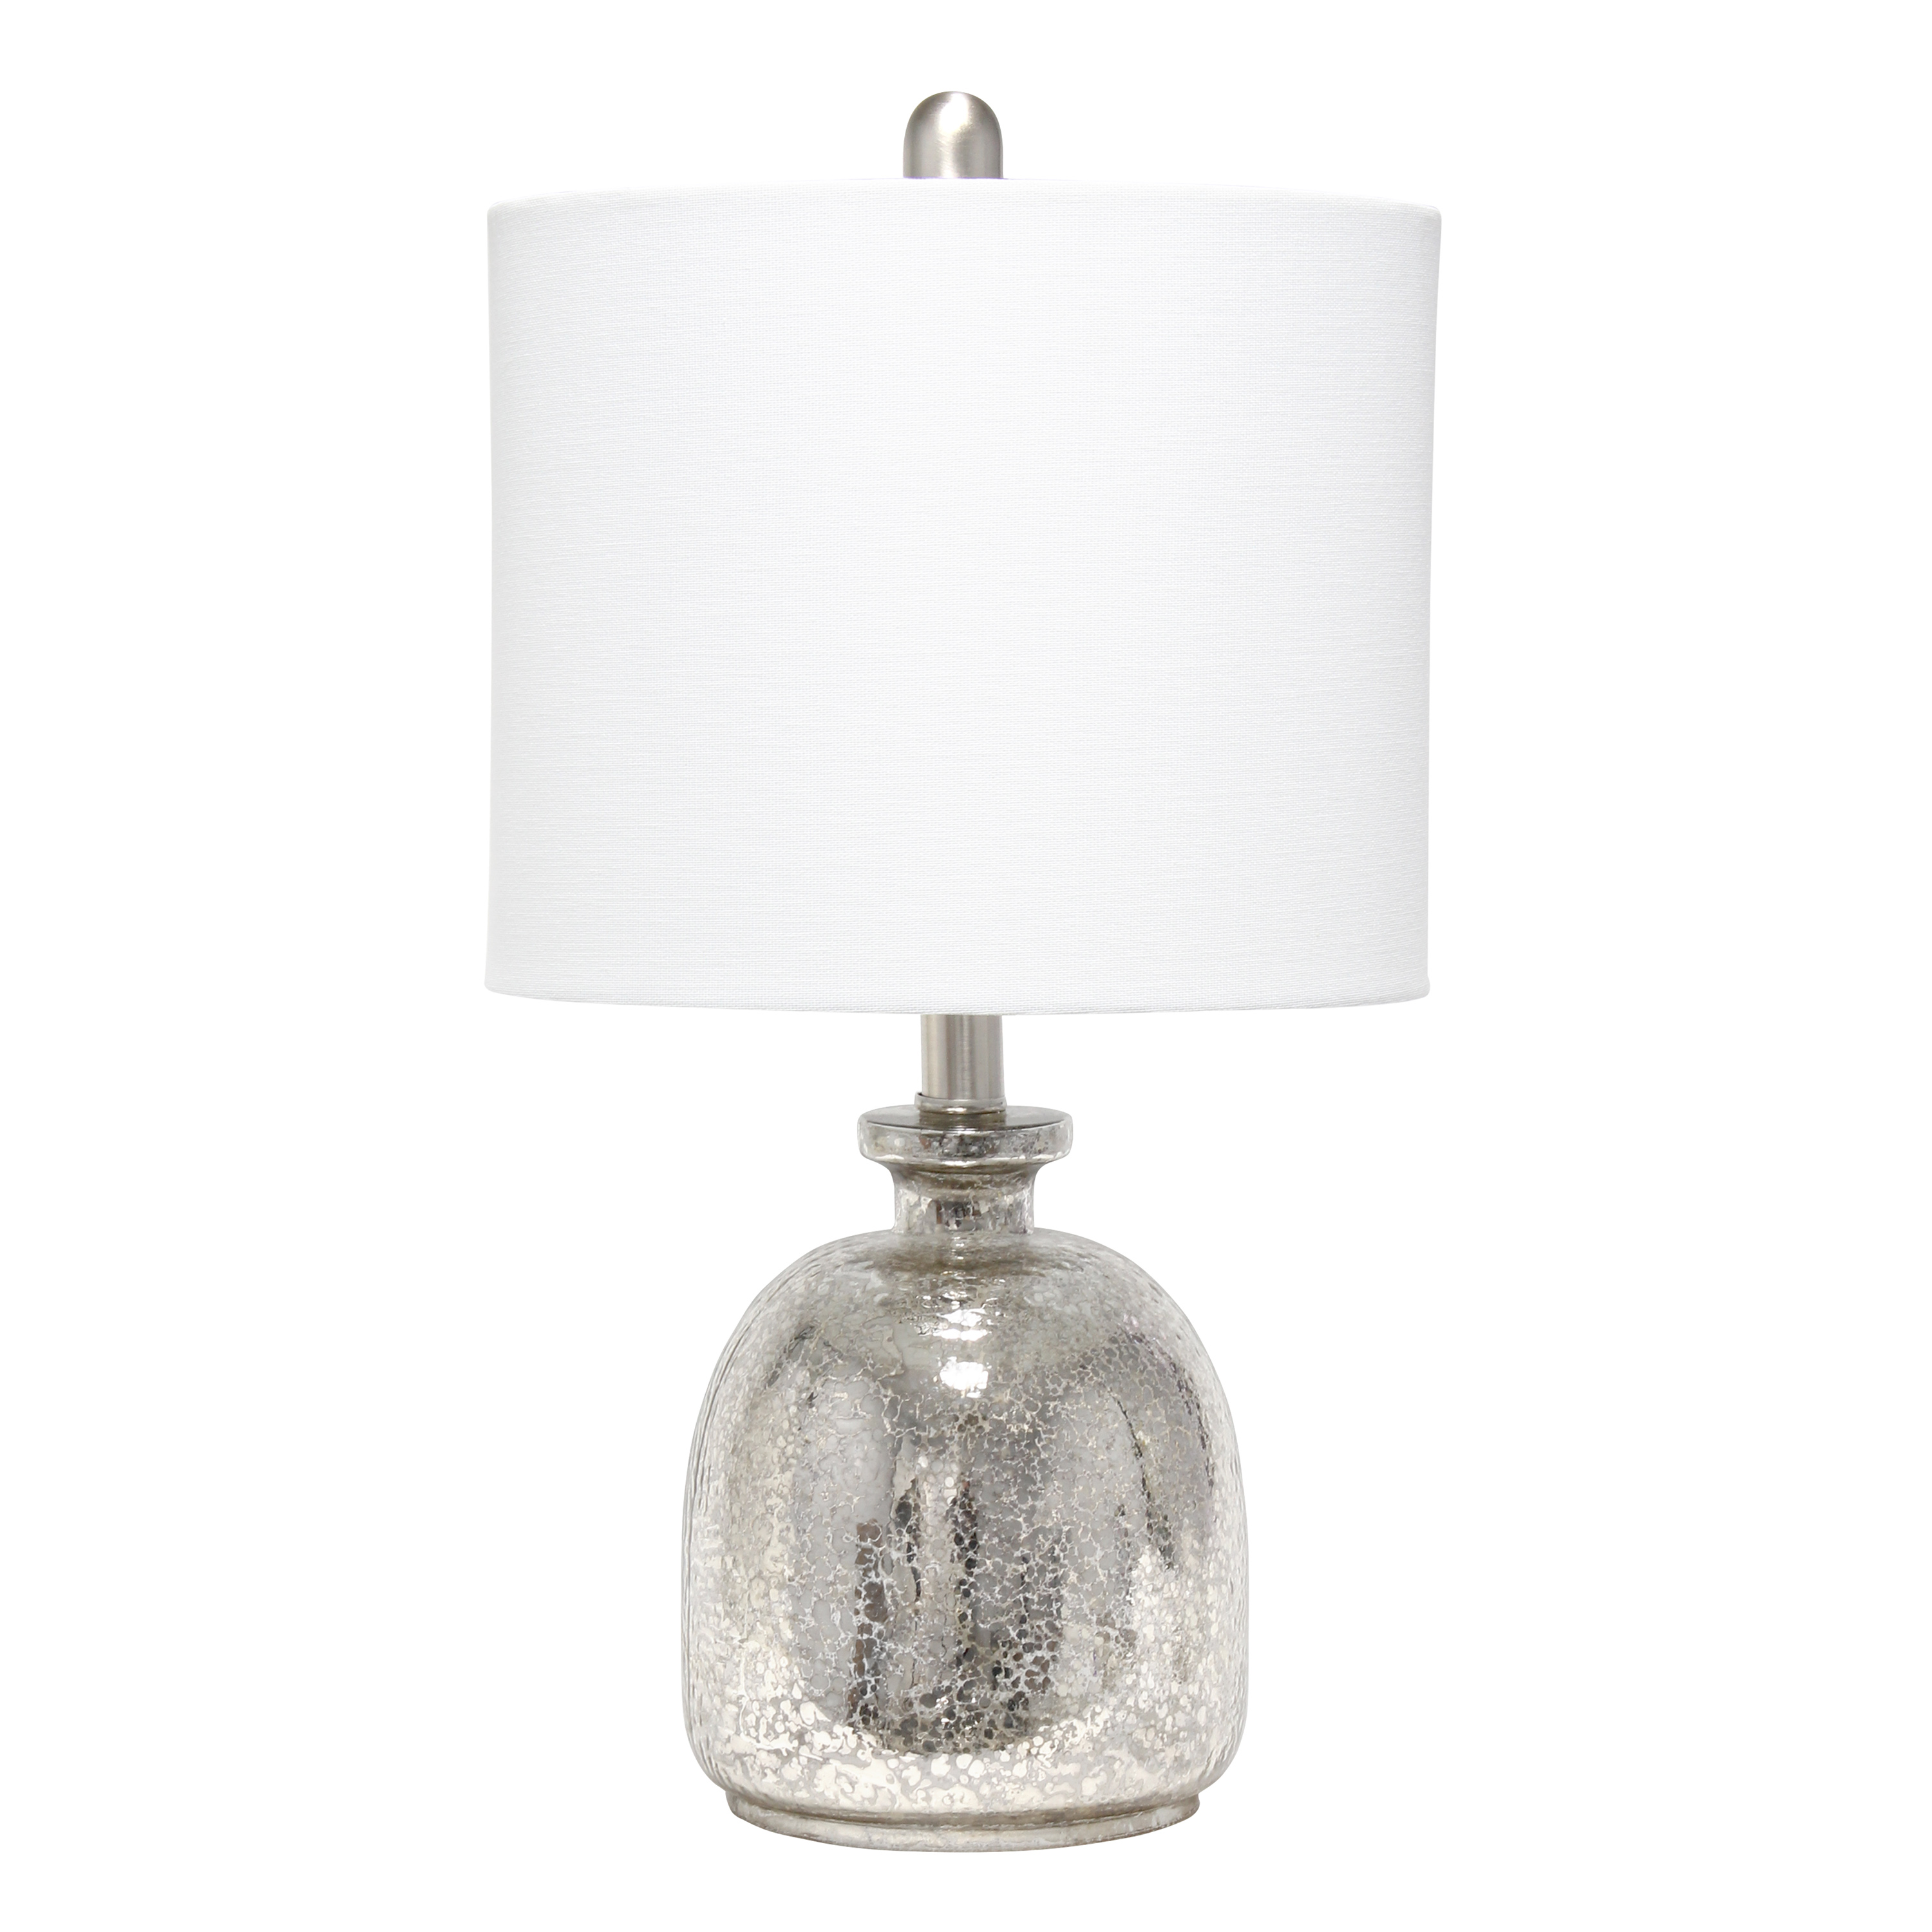 Lalia Home Mercury Hammered Glass Jar Table Lamp with White Linen Shade